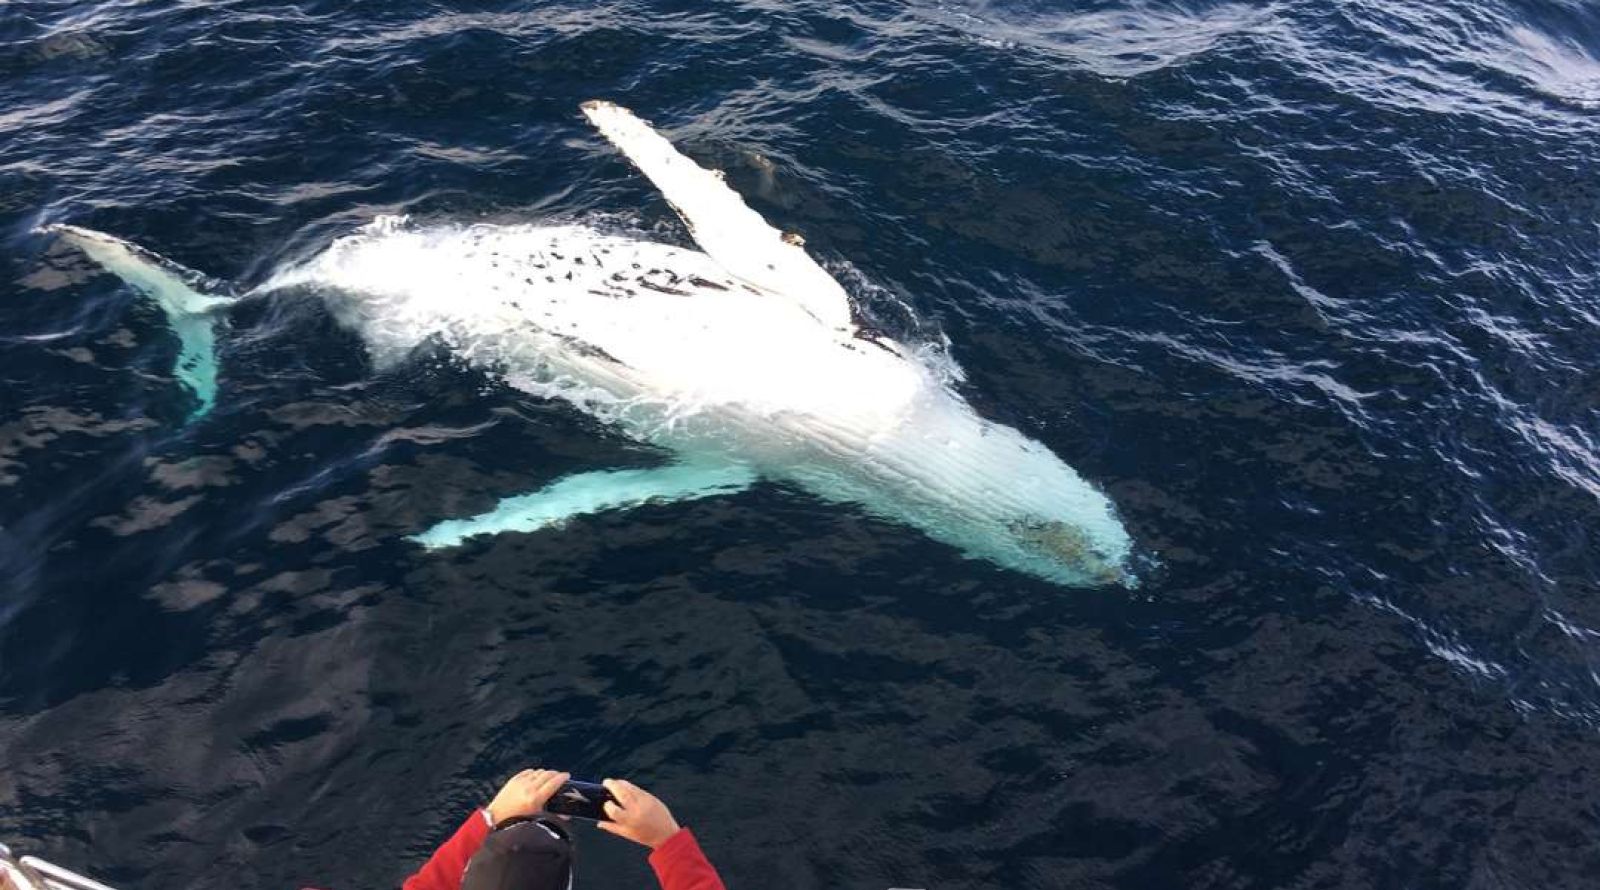 Sydney whale watching tours - up close to humpback whales from your boat